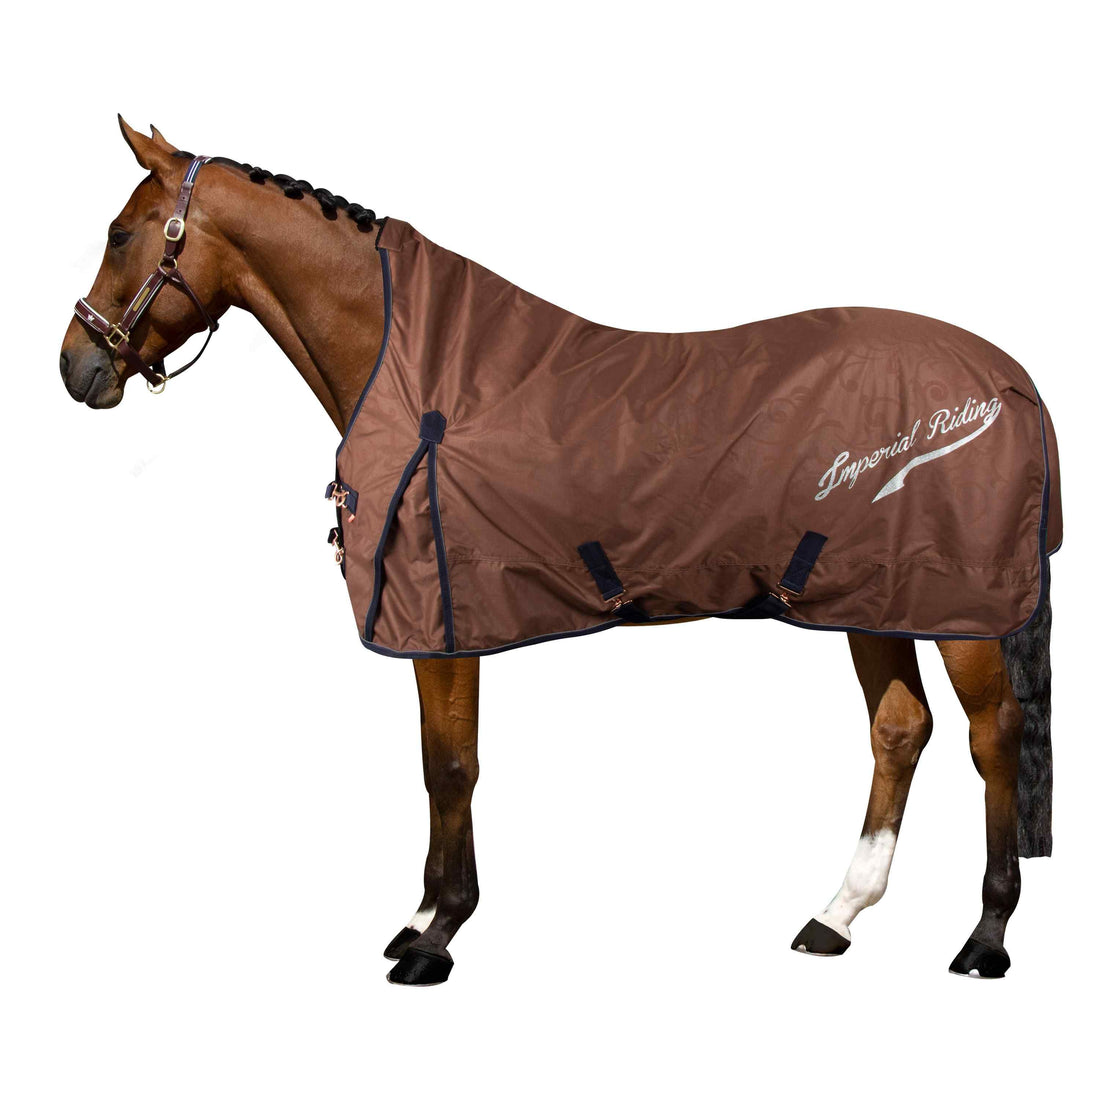 Imperial Riding - Outdoor blanket, Super-dry, 100gr